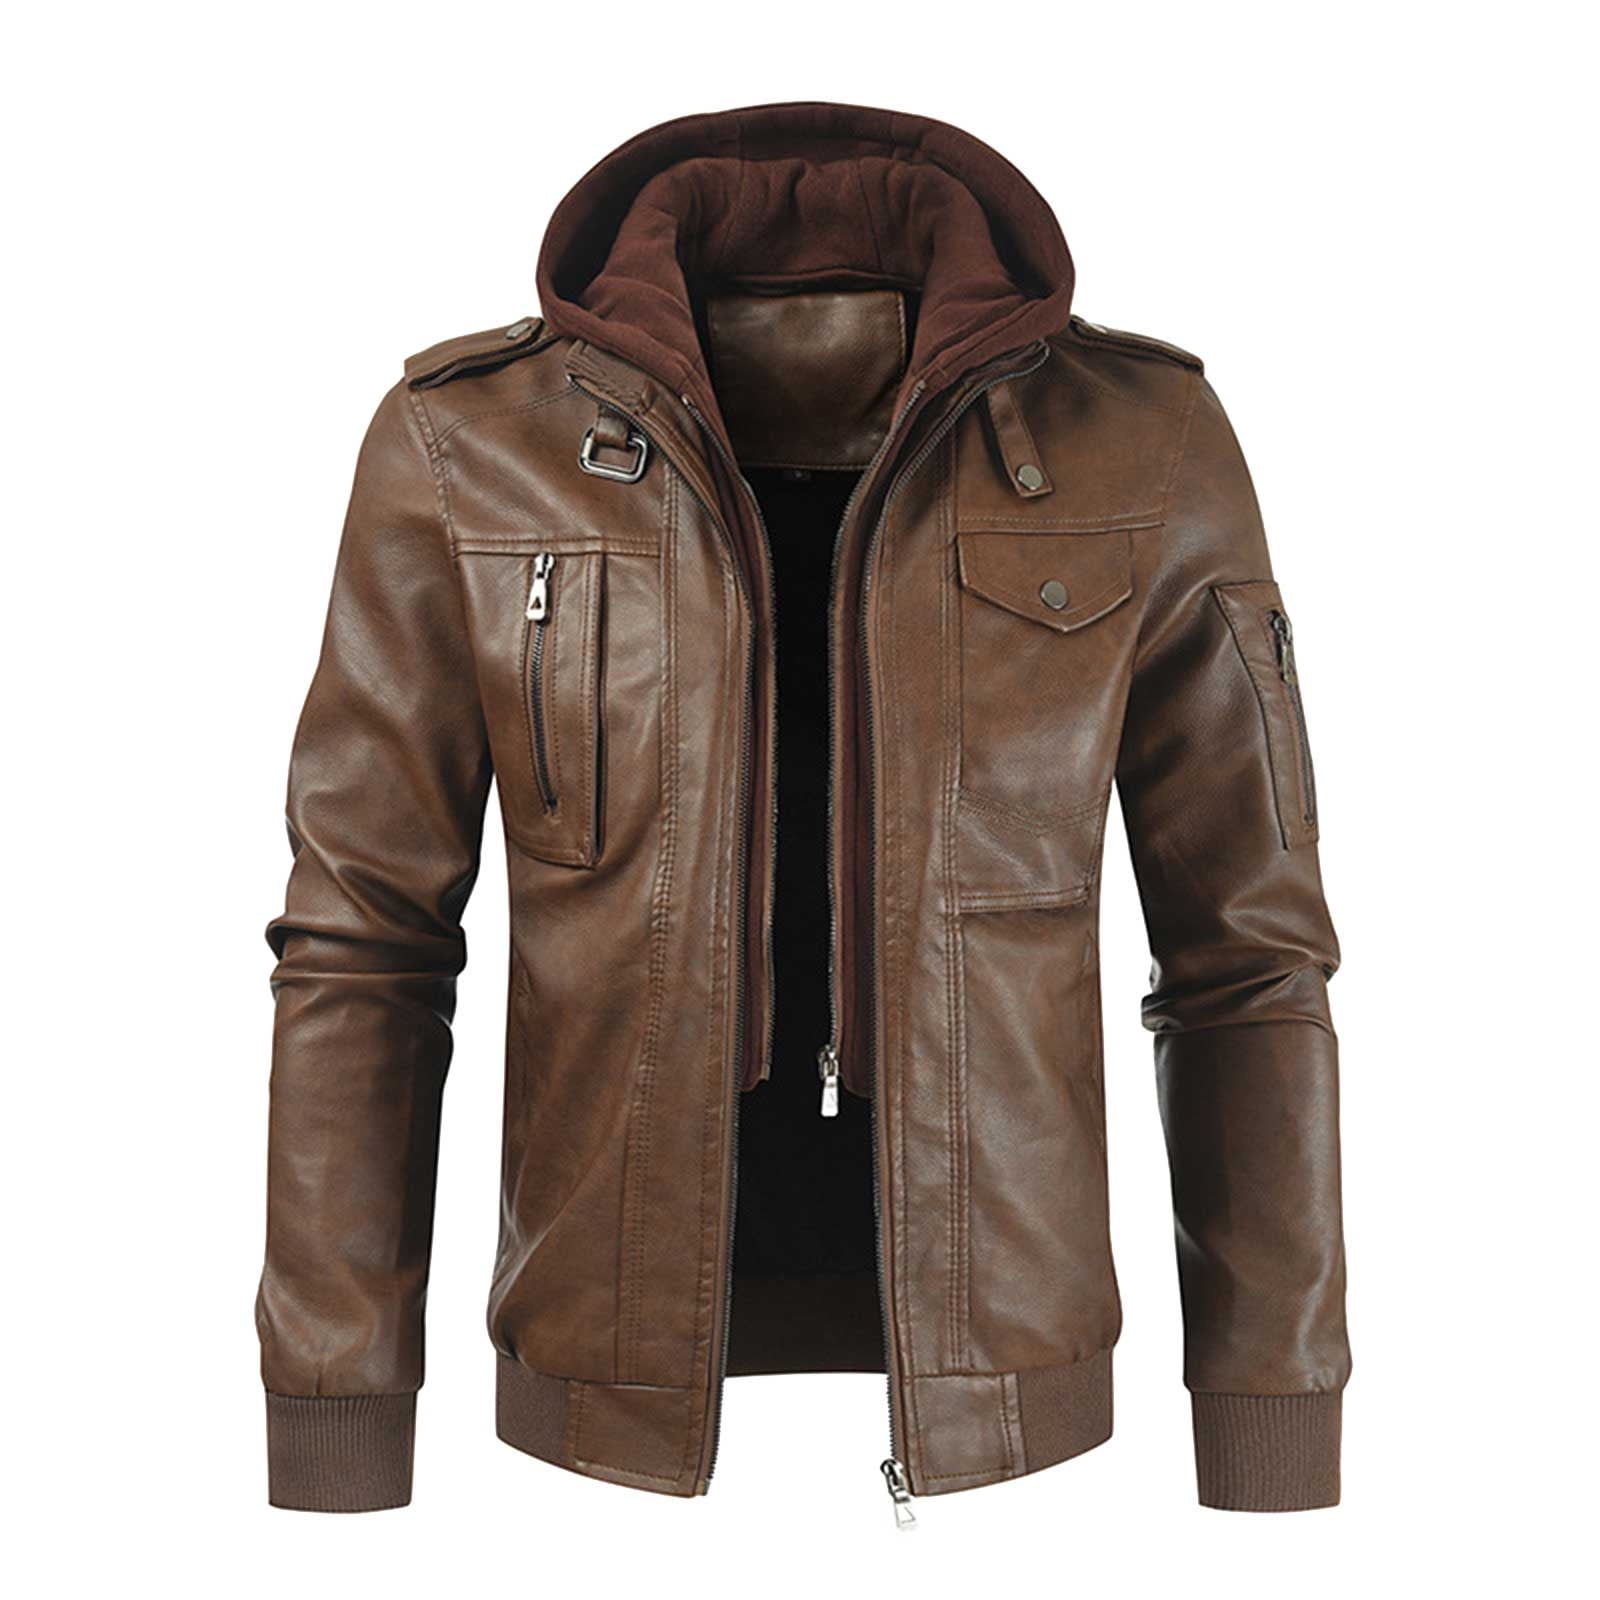 IROINNID Men's Long Sleeve Faux Leather Short Jacket Solid Color Casual ...